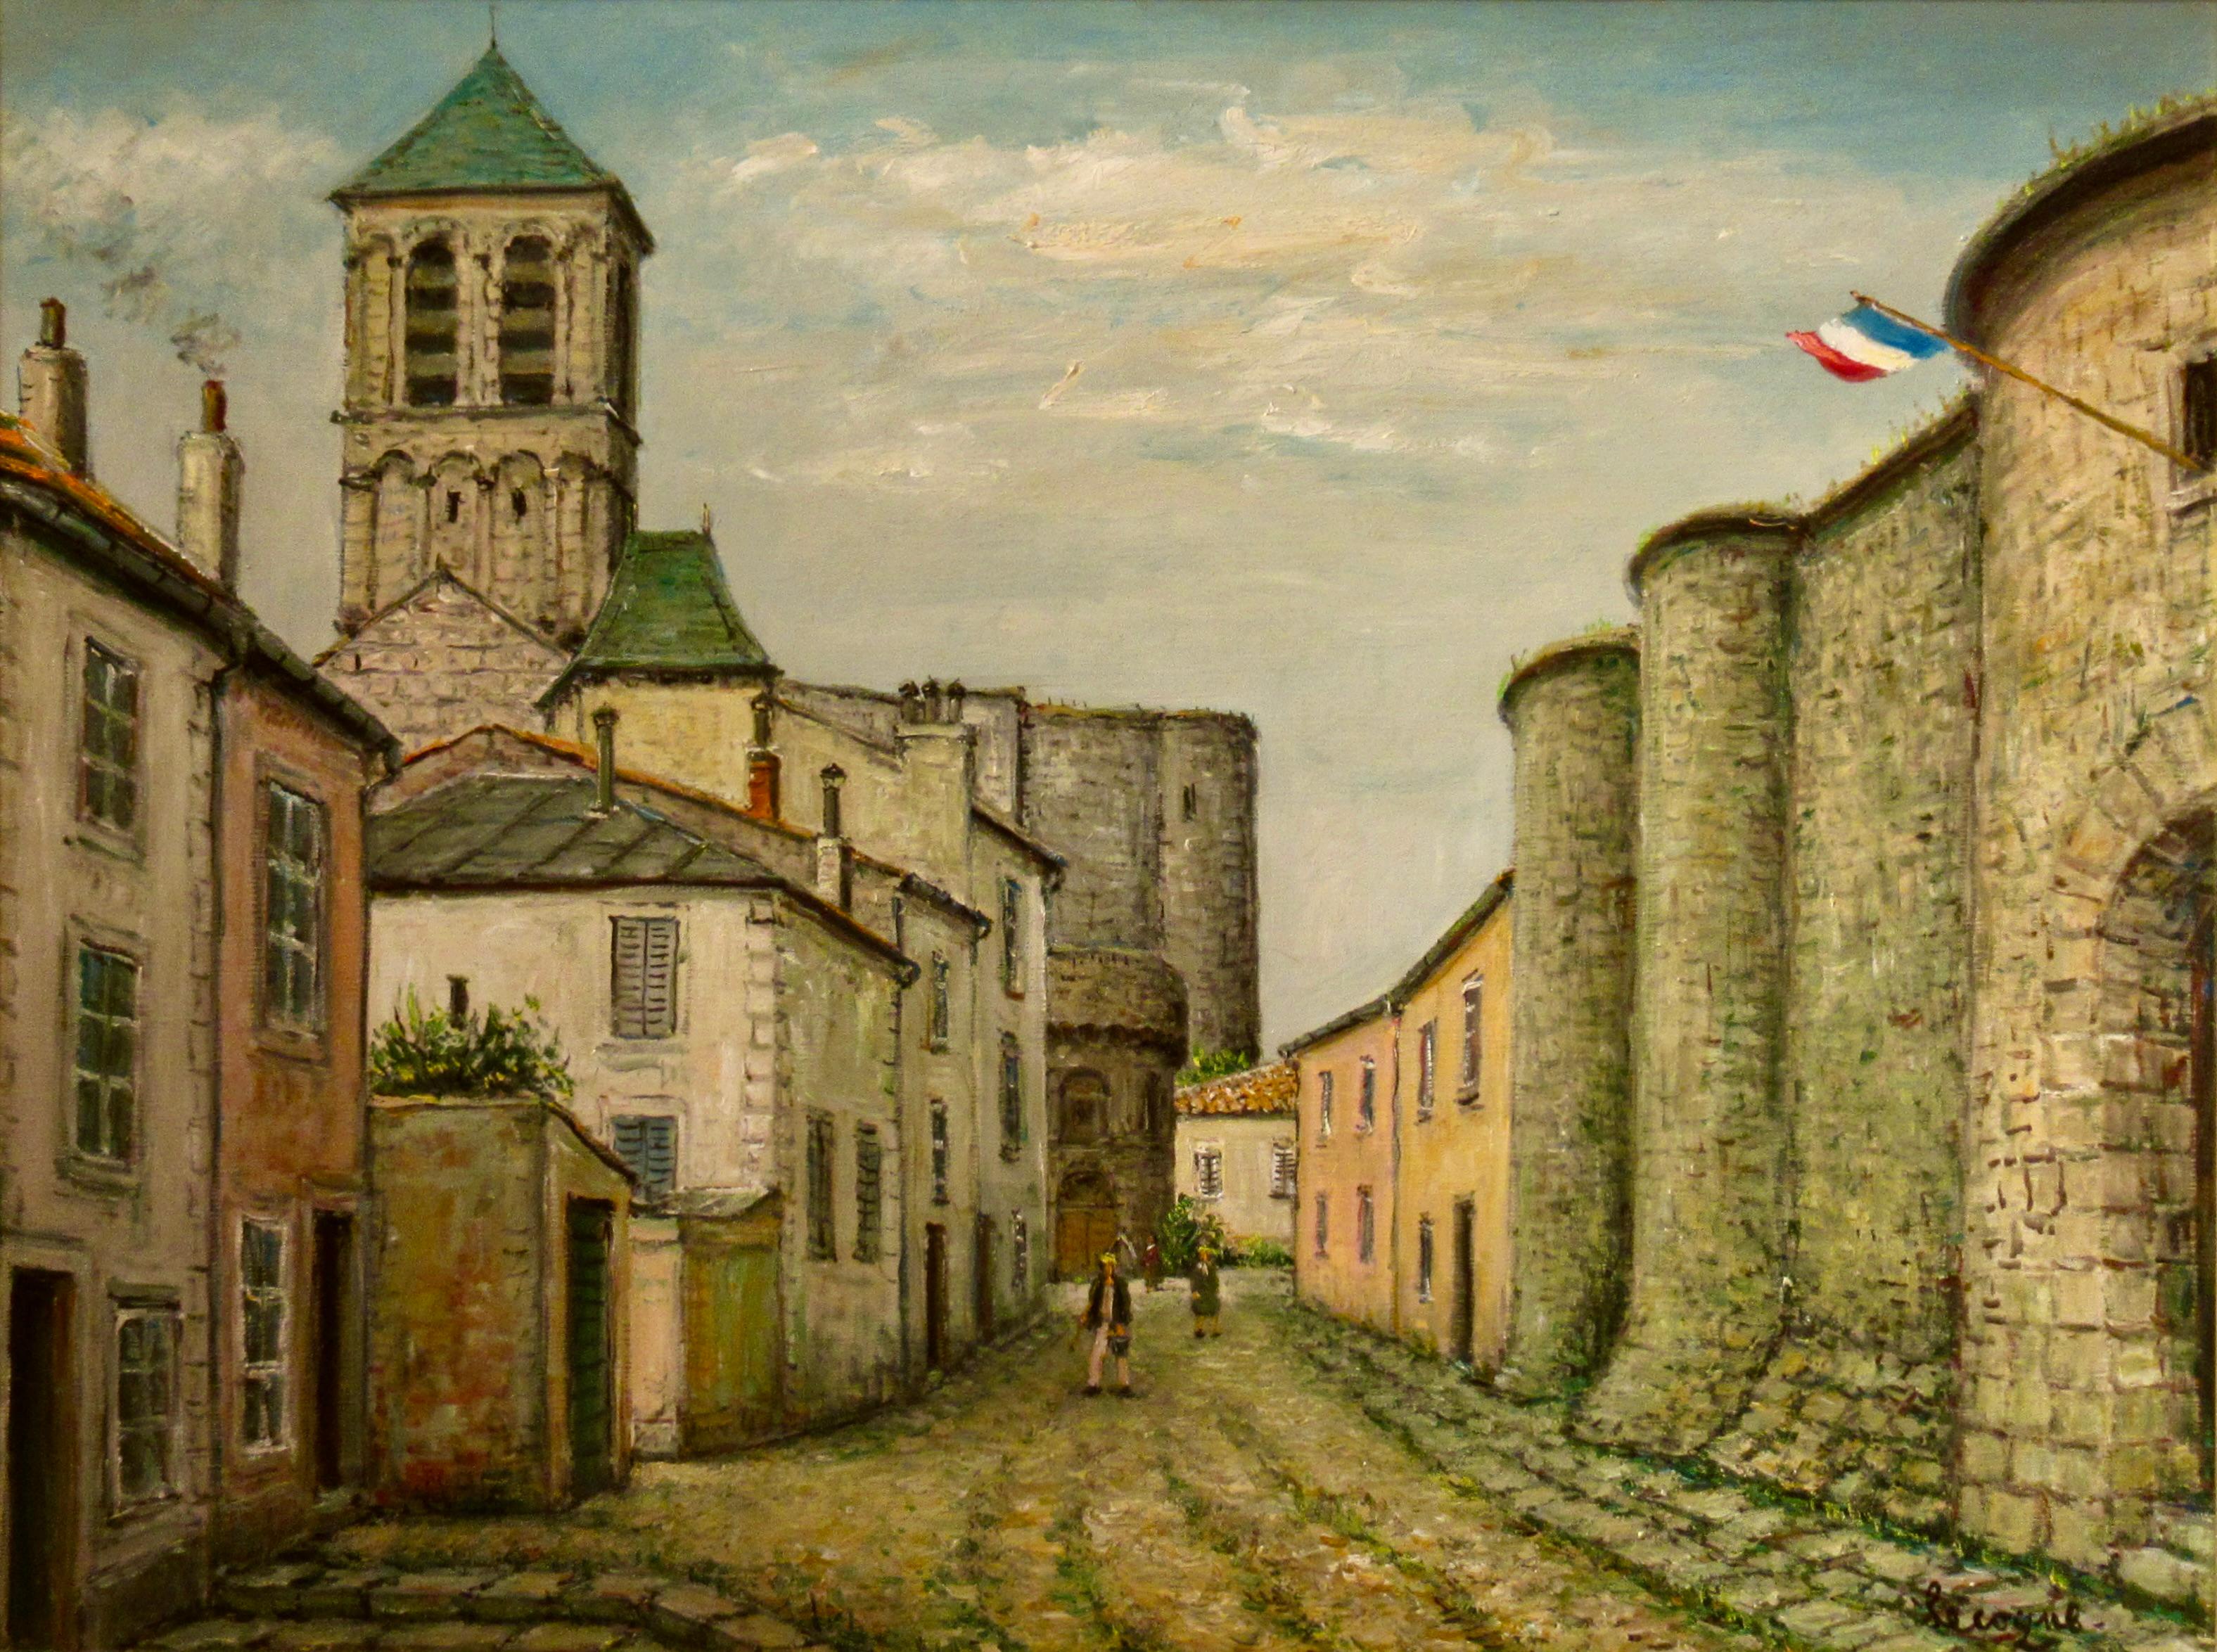 Medieval City - Painting by Alois Lecoque